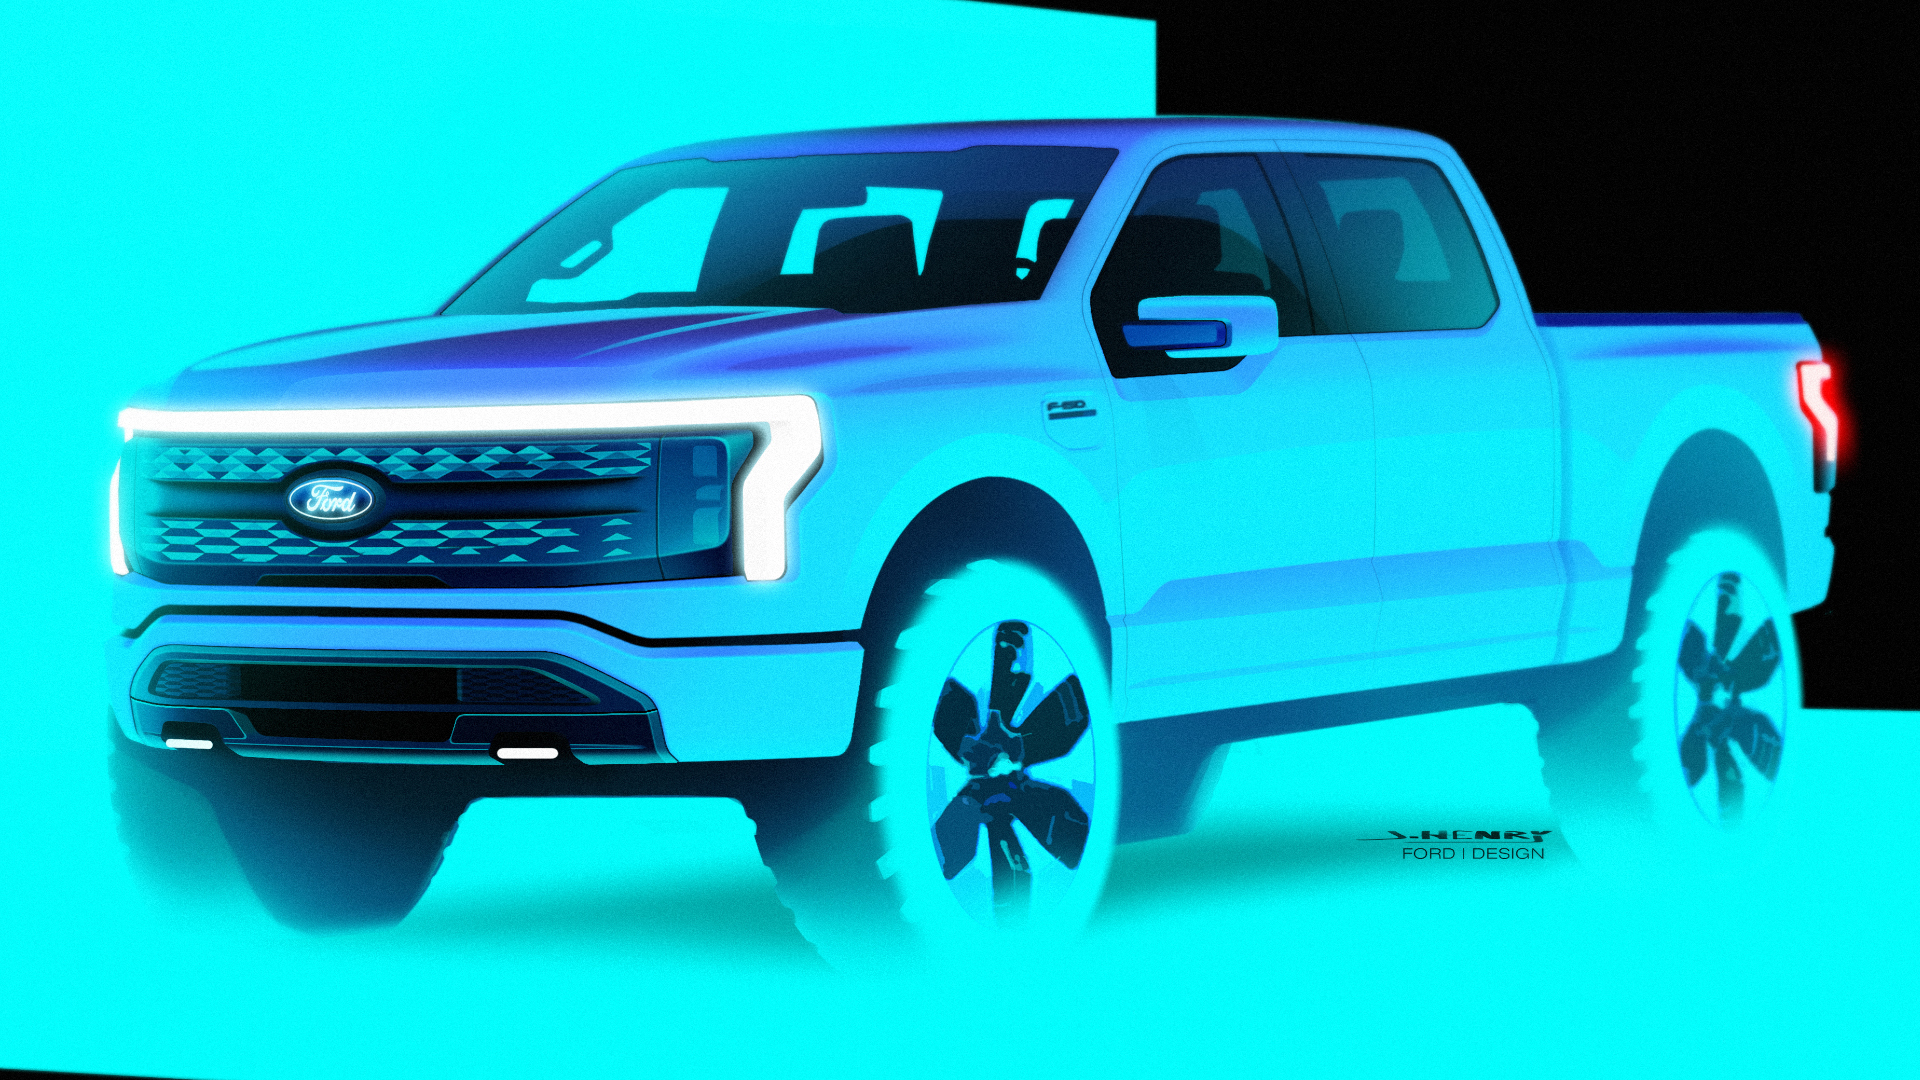 Pre-production sketch of the F-150 Lightning.